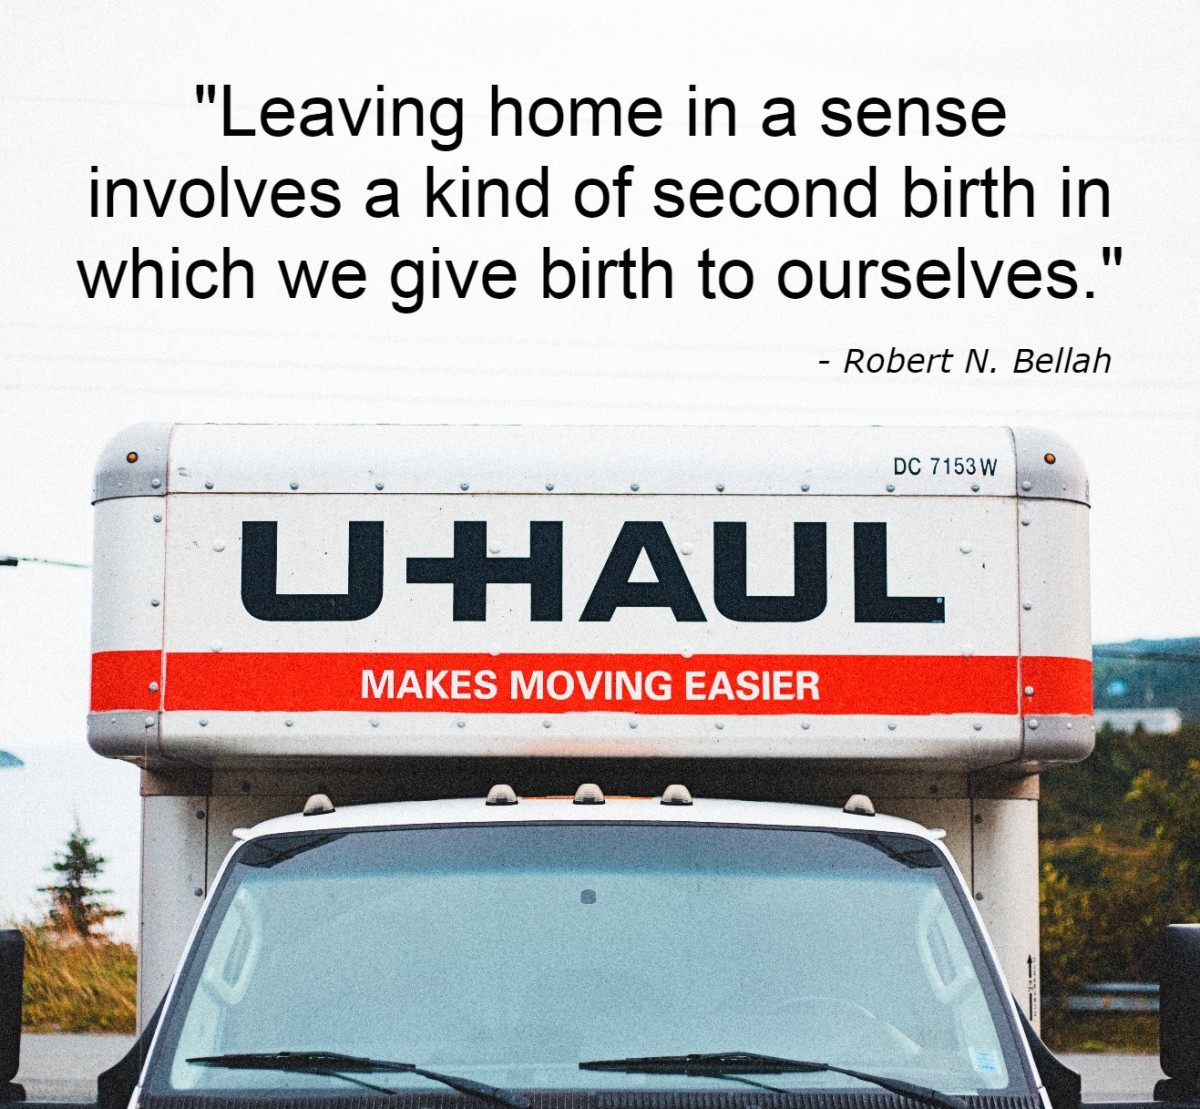 "Leaving home in a sense involves a kind of second birth in which we give birth to ourselves." - Dr. Robert N. Bellah, American sociologist 